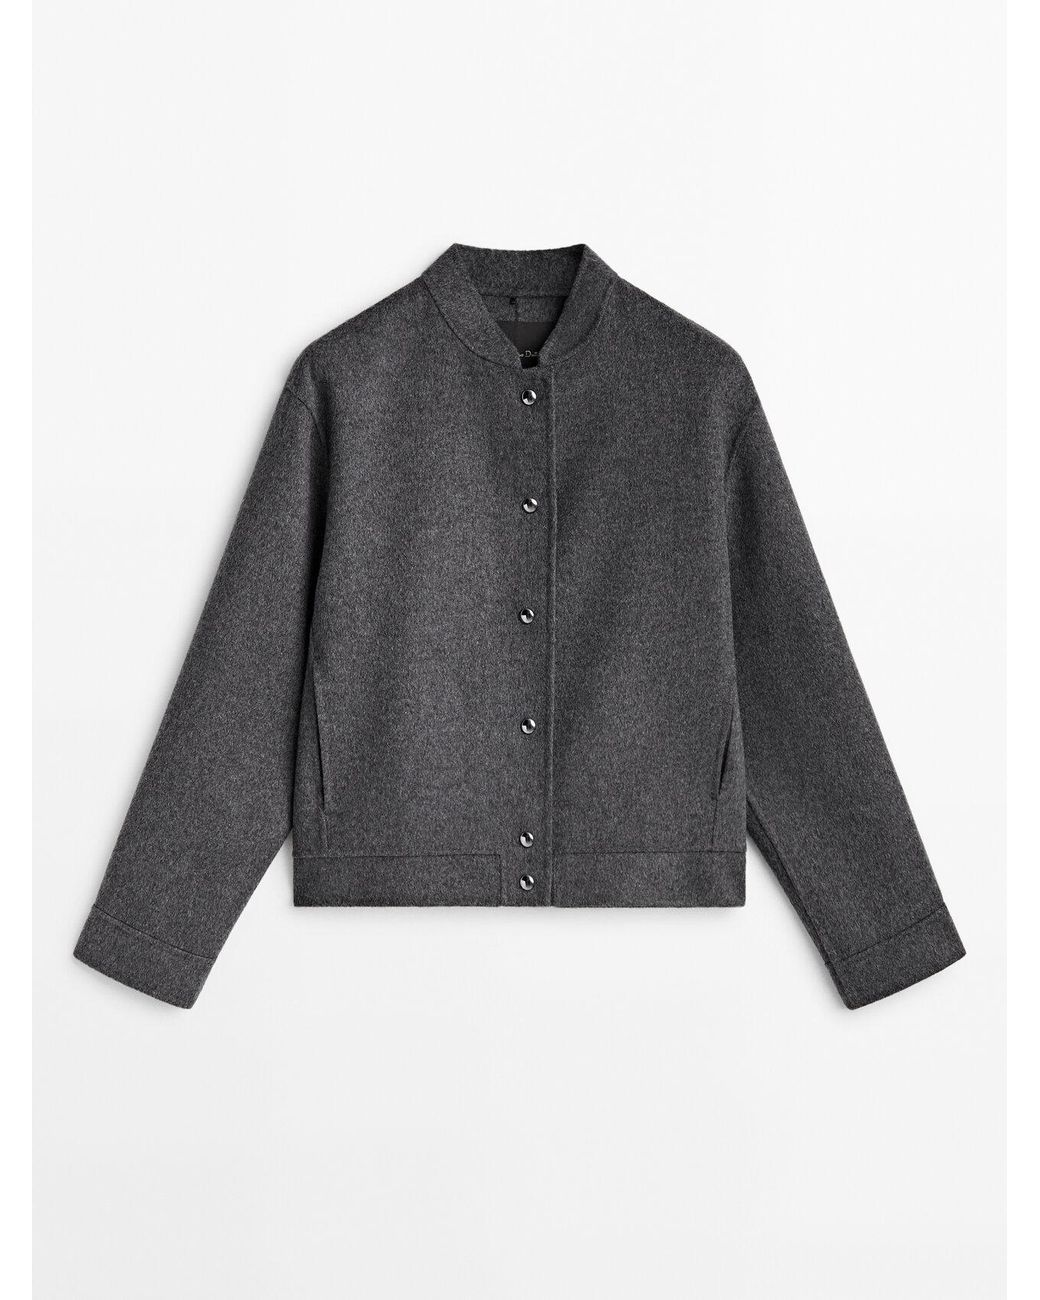 MASSIMO DUTTI Cropped Wool Blend Bomber Jacket in Gray | Lyst